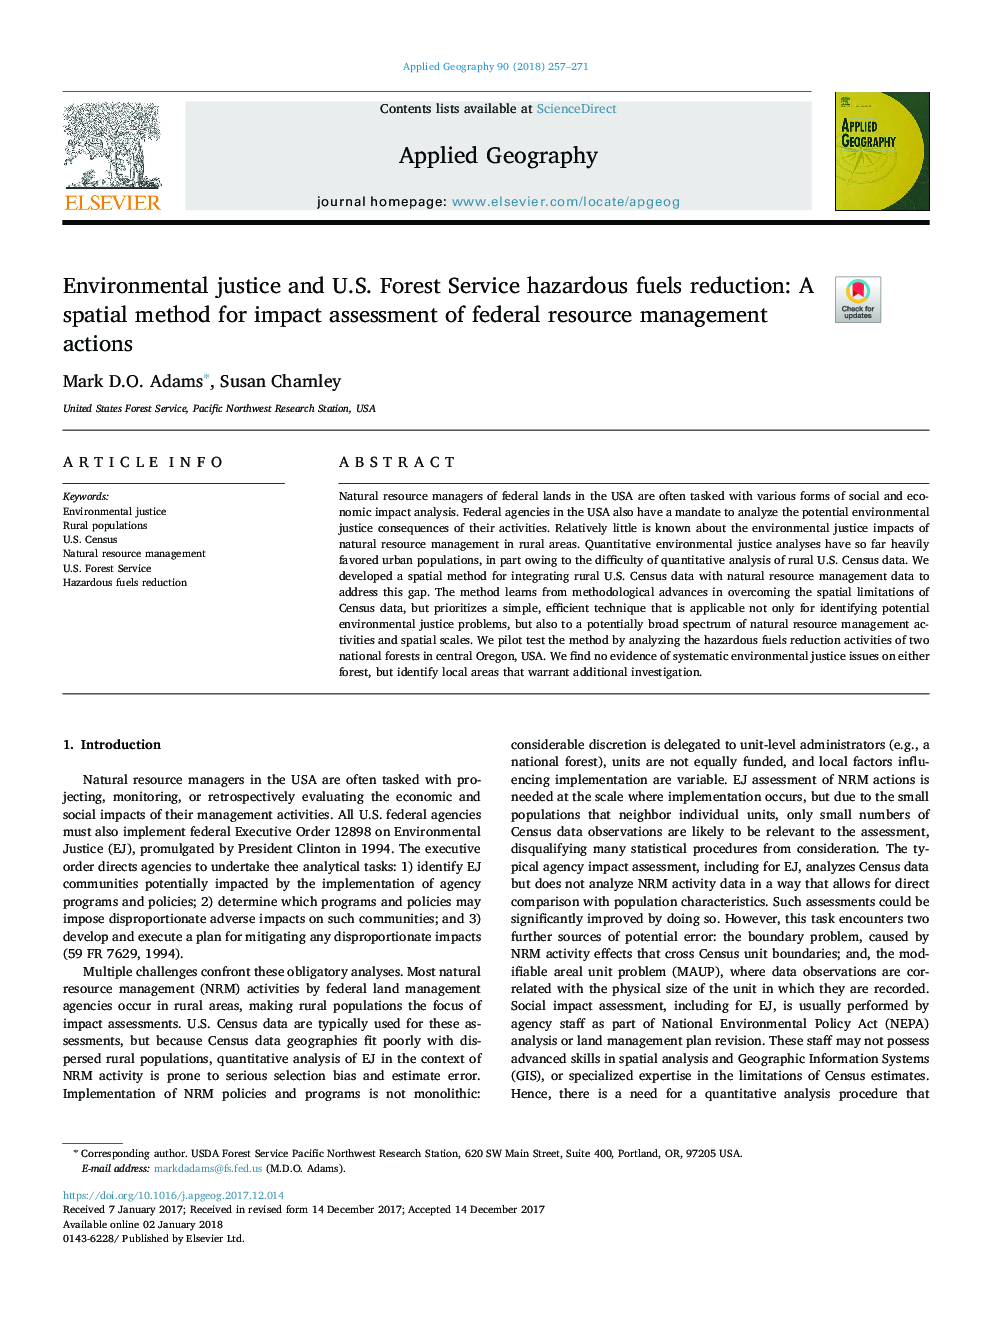 Environmental justice and U.S. Forest Service hazardous fuels reduction: A spatial method for impact assessment of federal resource management actions